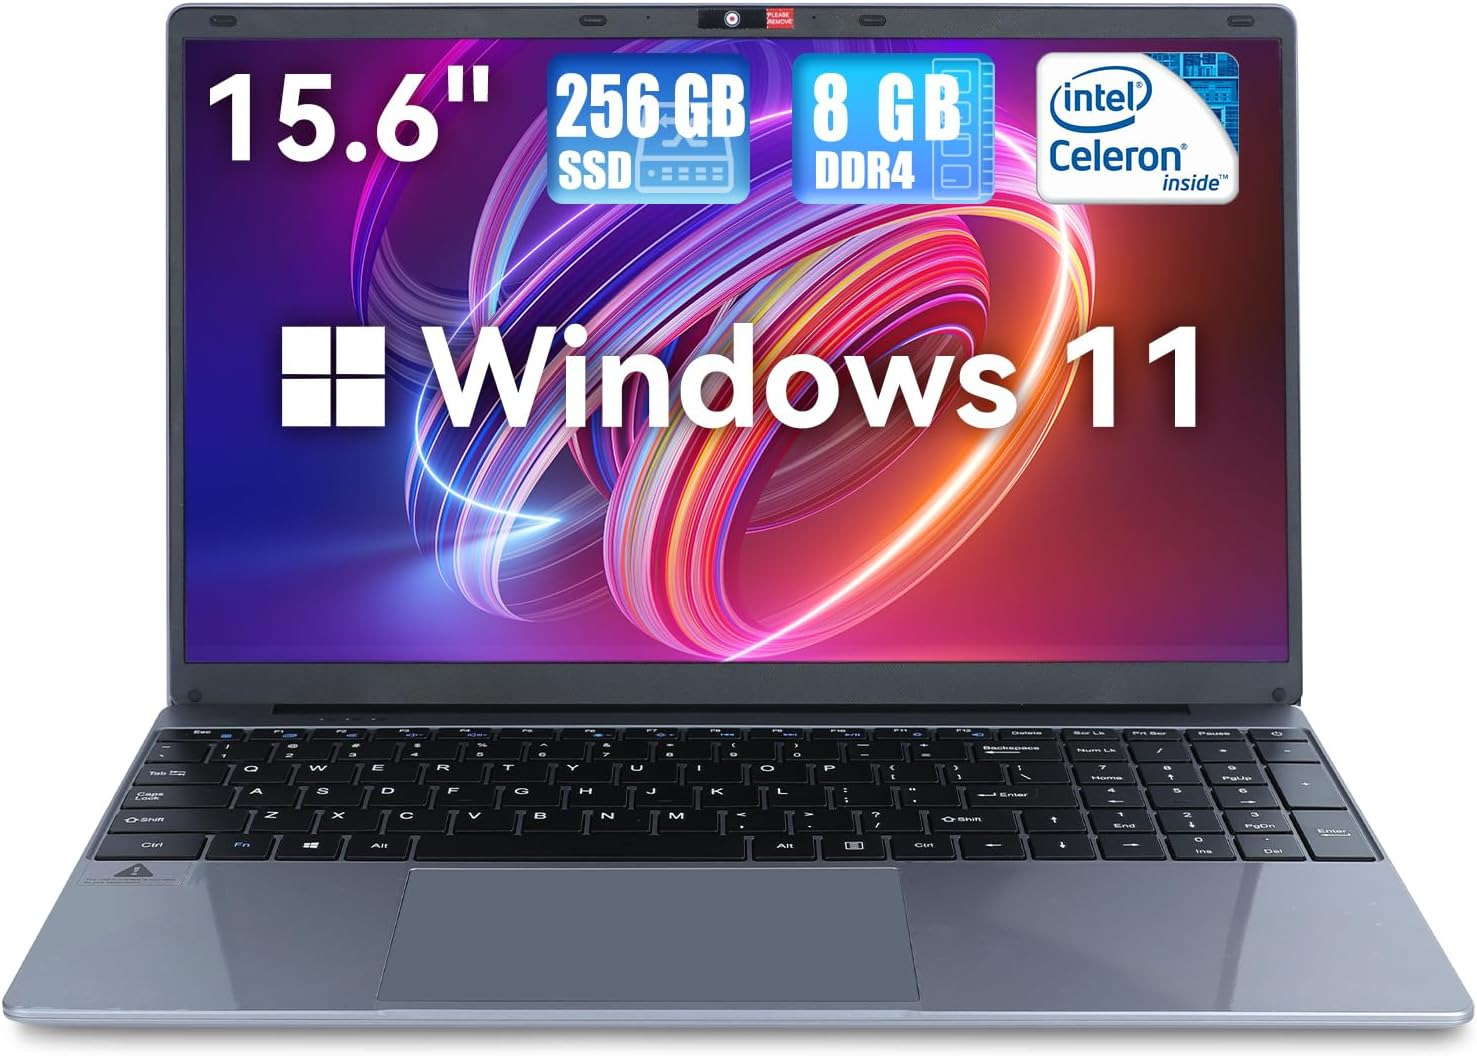 SGIN Laptop 15.6 Inch 8GB RAM 256GB SSD Computer with Intel Celeron Up to 2.8GHz